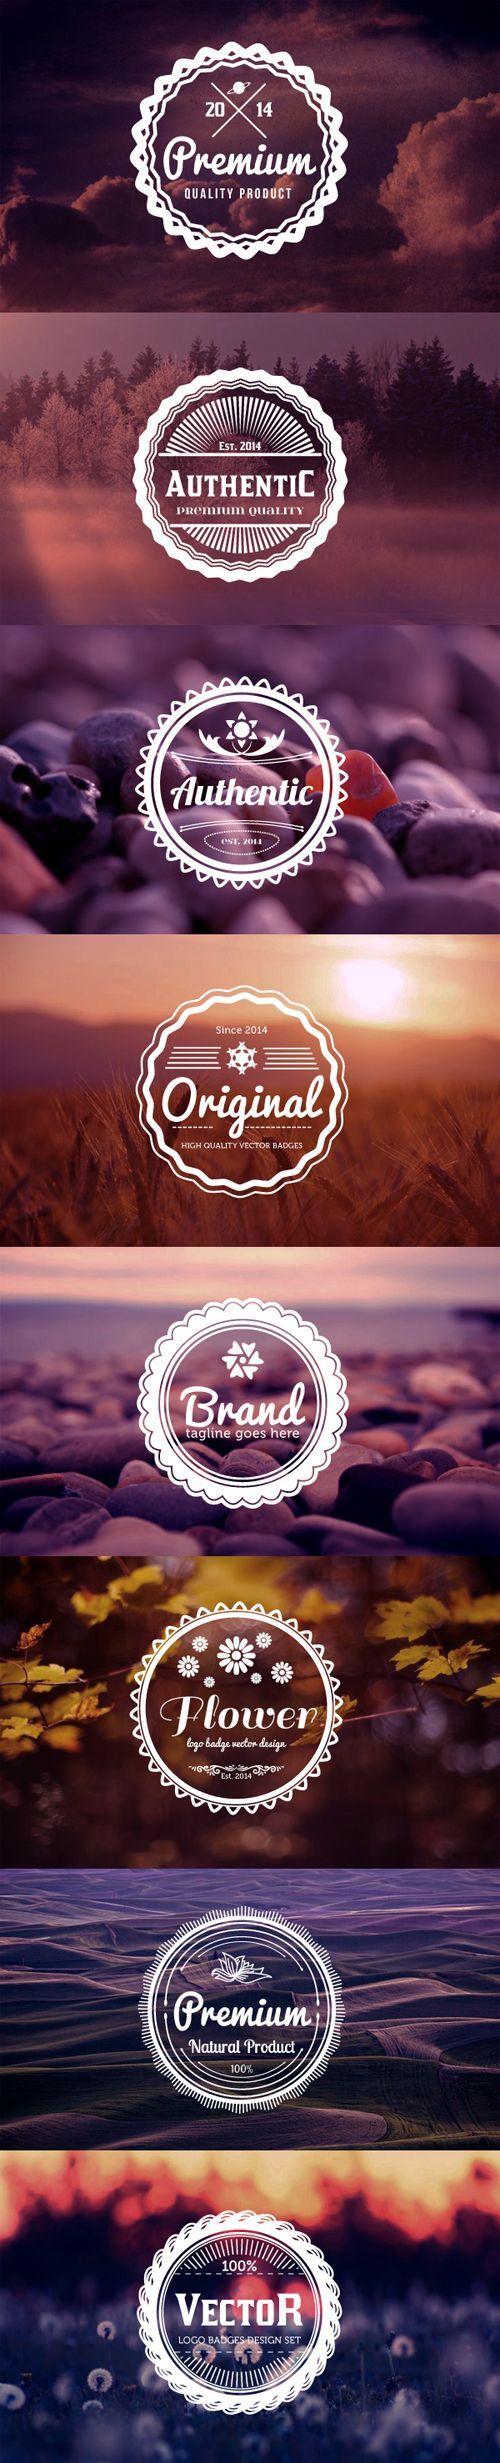 Some cool looking badges, the background images are a little over-edited in my opinion, though.